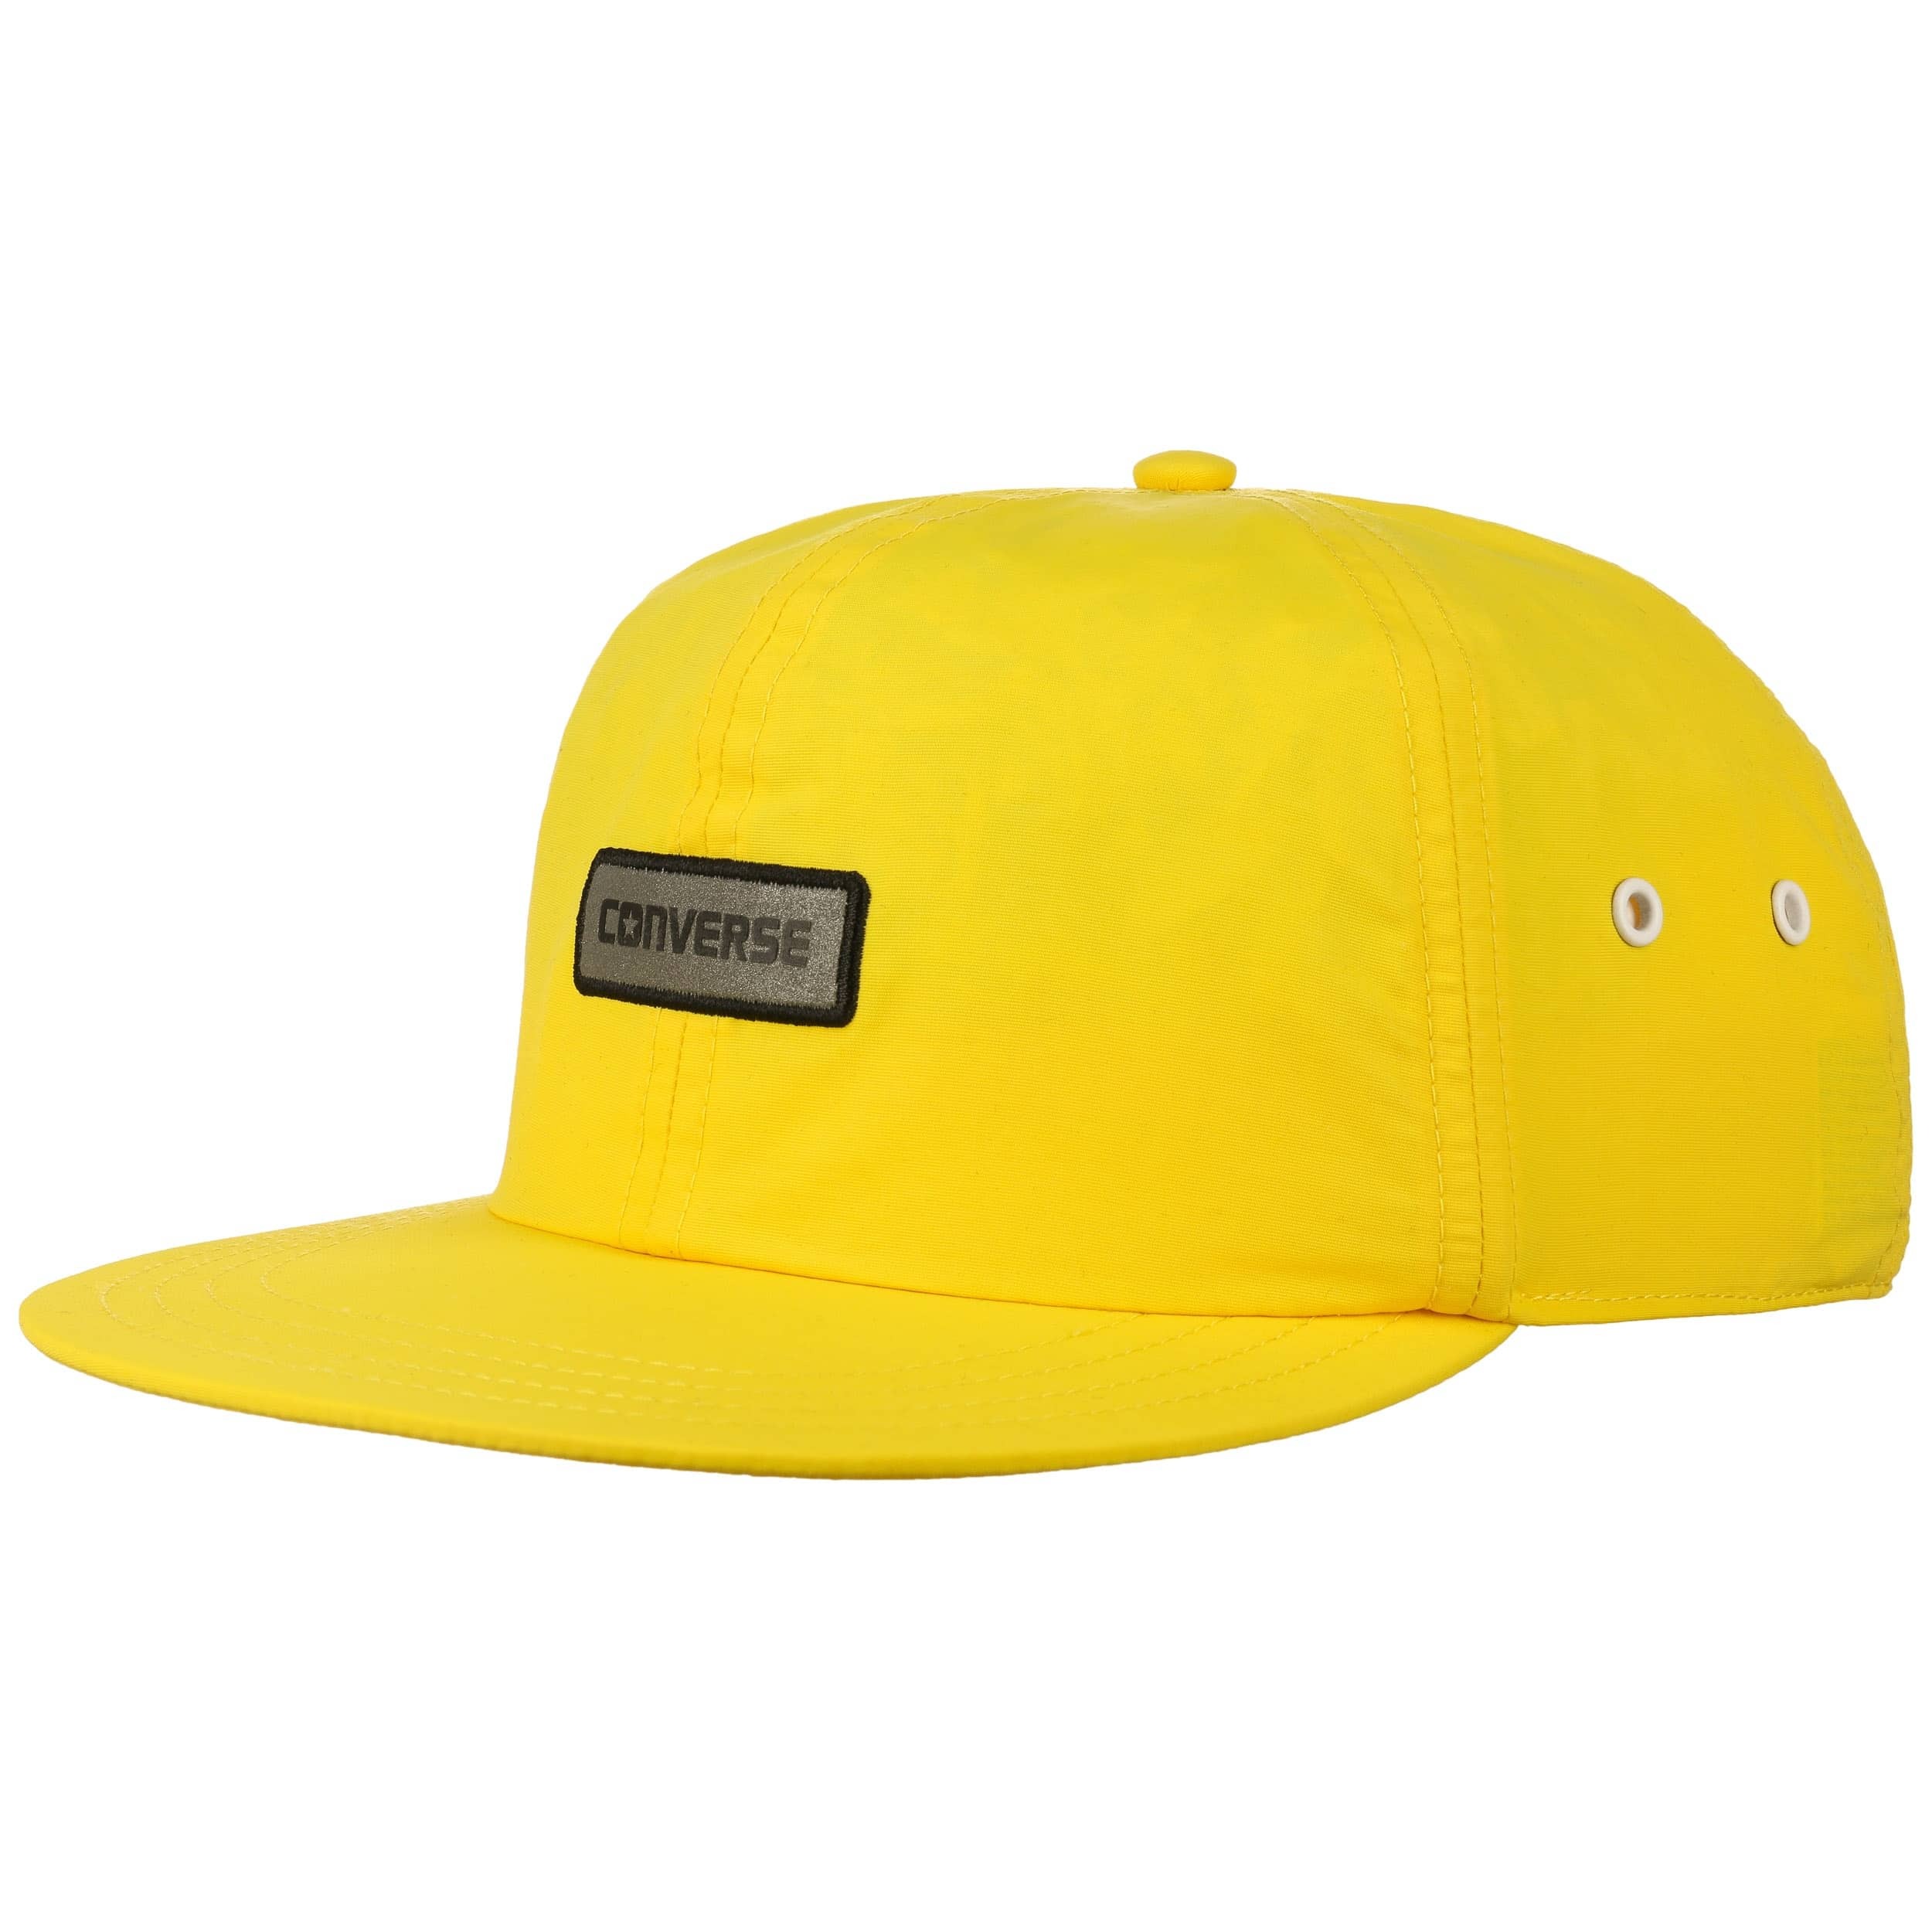 Crushable Snapback Cap by Converse - 19,95